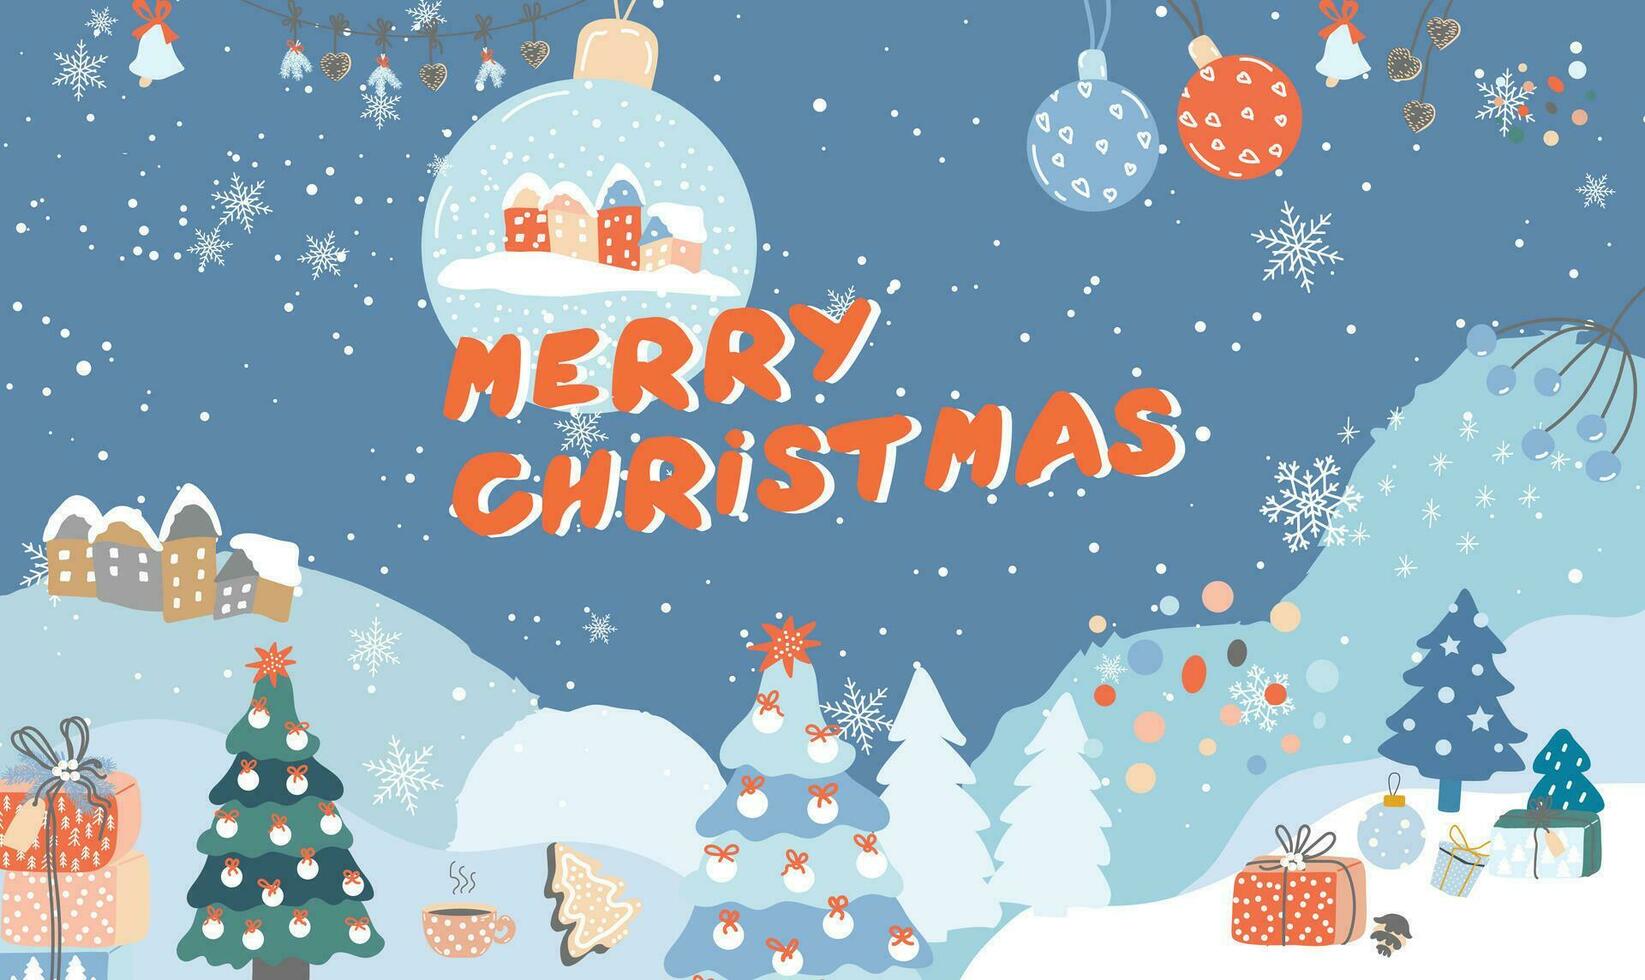 Snowflake background for Merry Christmas and Happy New Year. Vector illustration Welcome winter  with falling gold and silver snow. Vector illustration